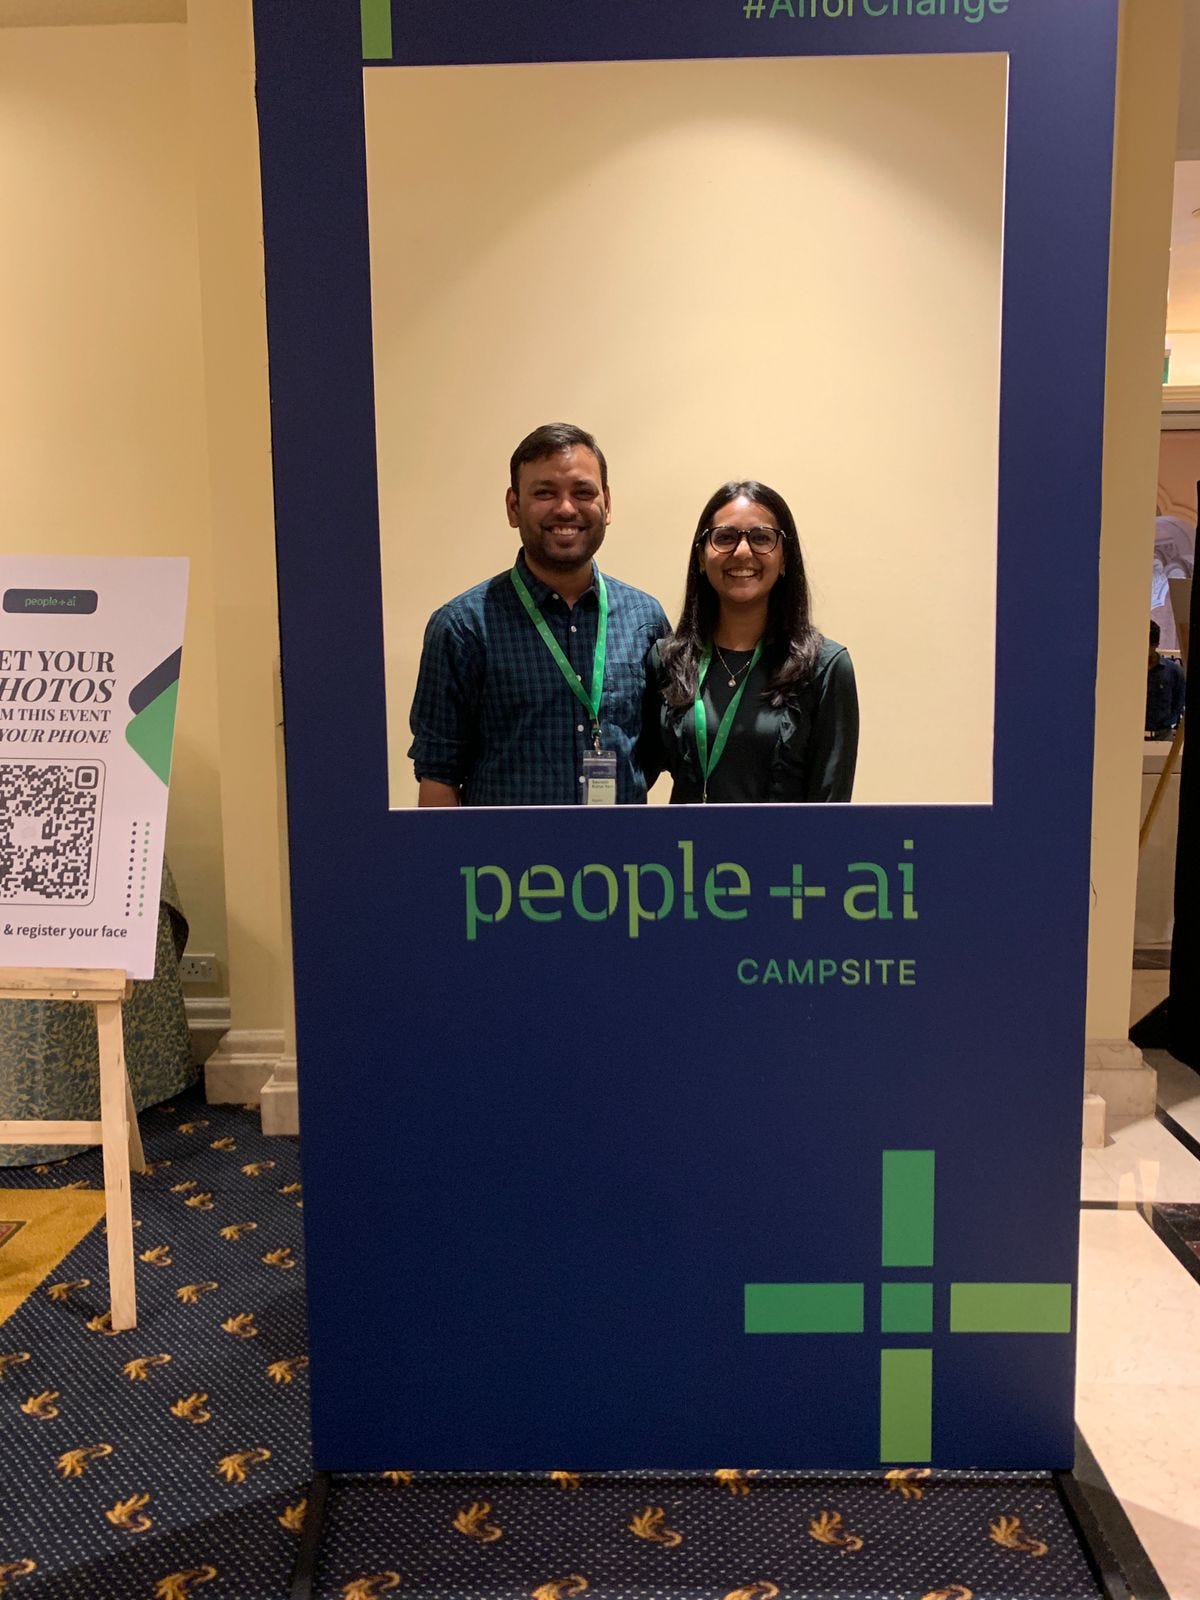 Saurabh standing with his colleague Smita in a photobooth that says "people + ai campsite"